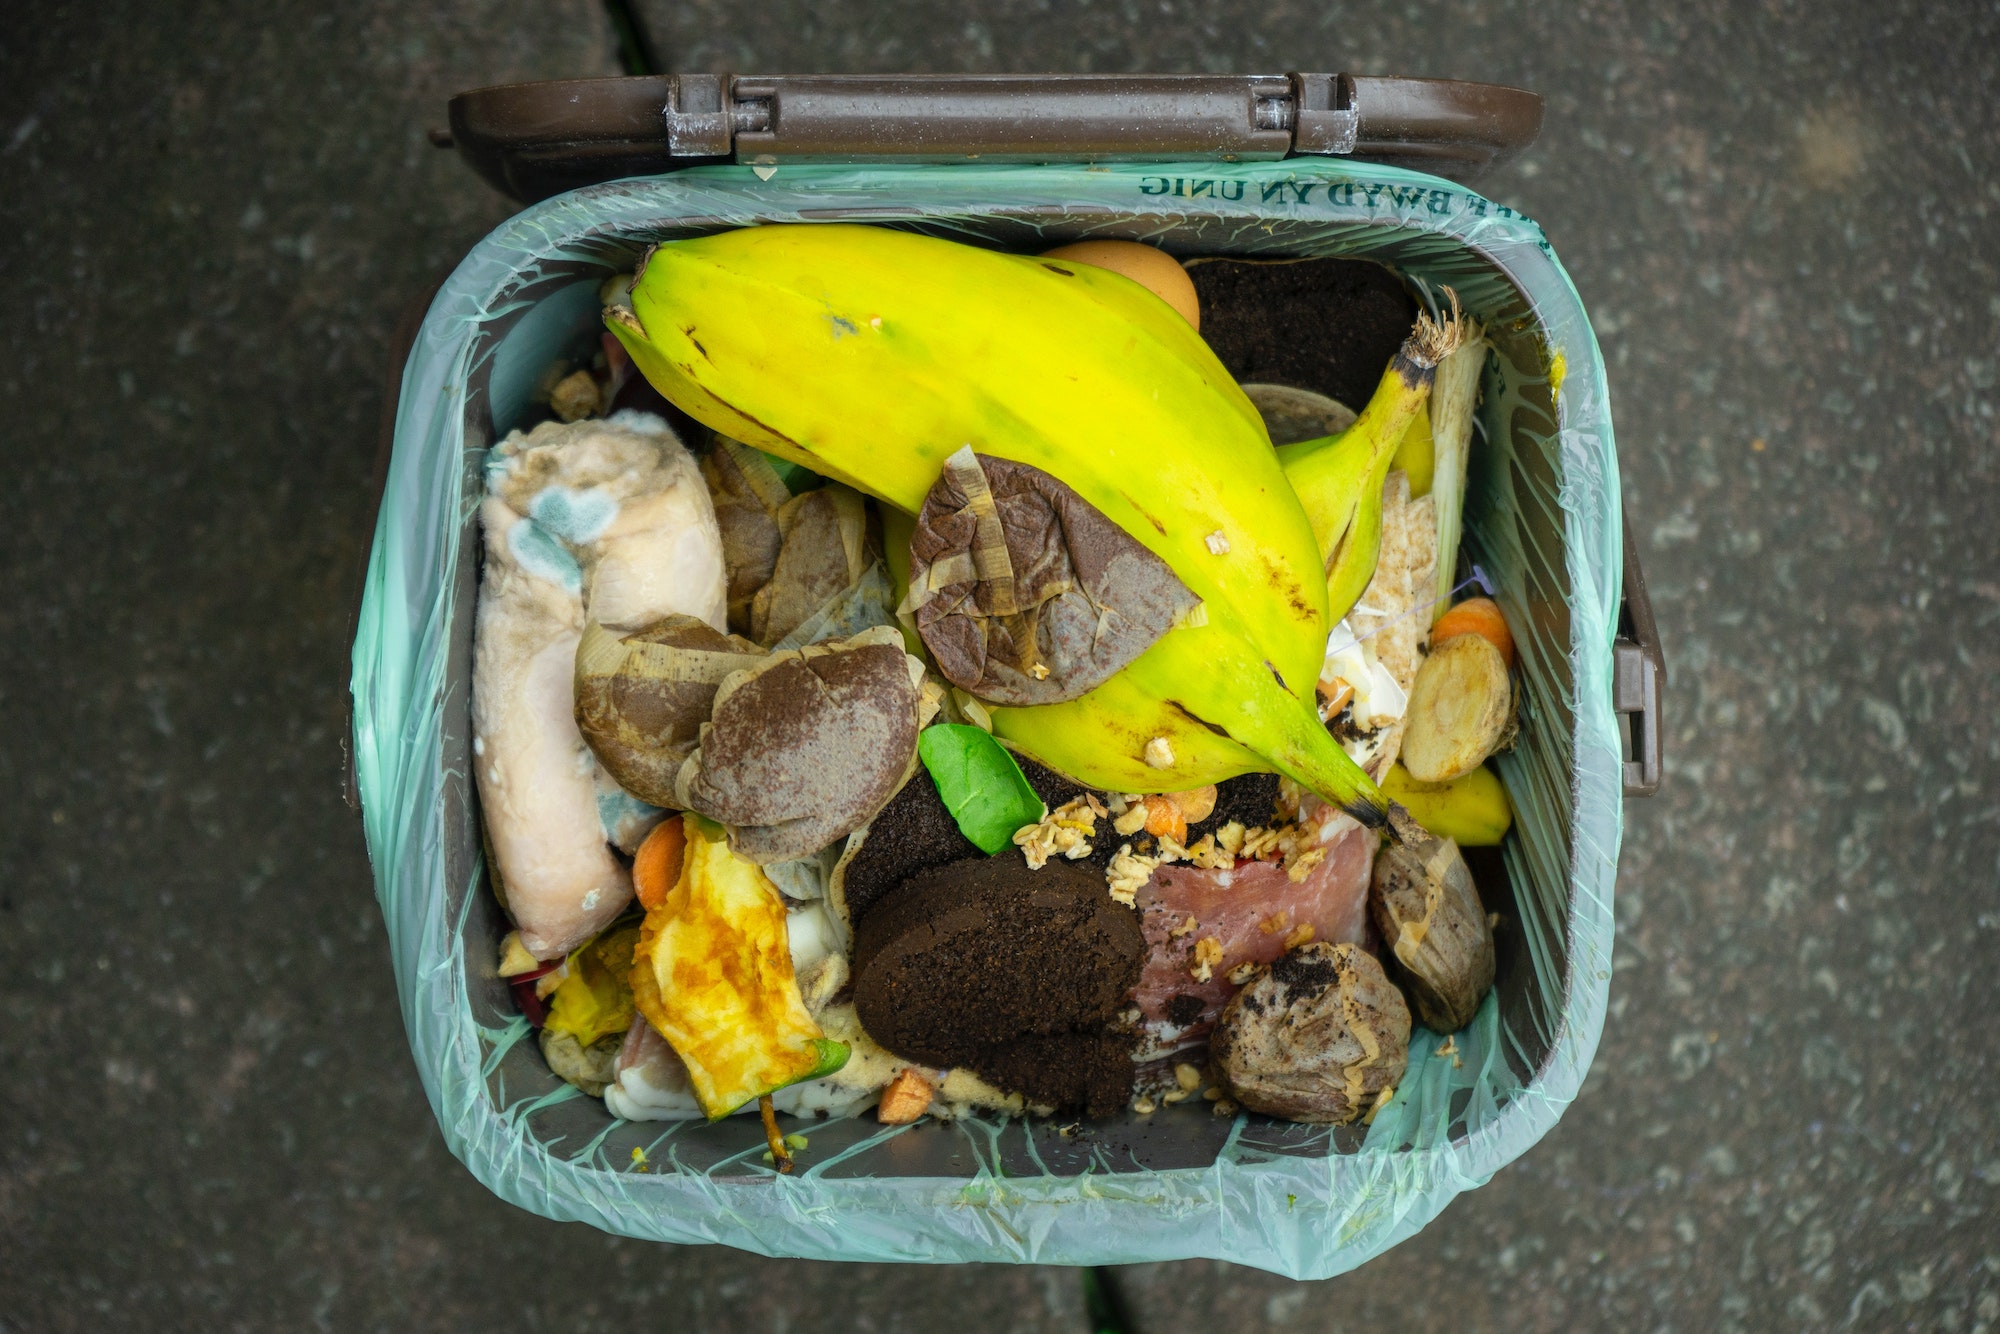 Food Waste | The World's Largest Lesson